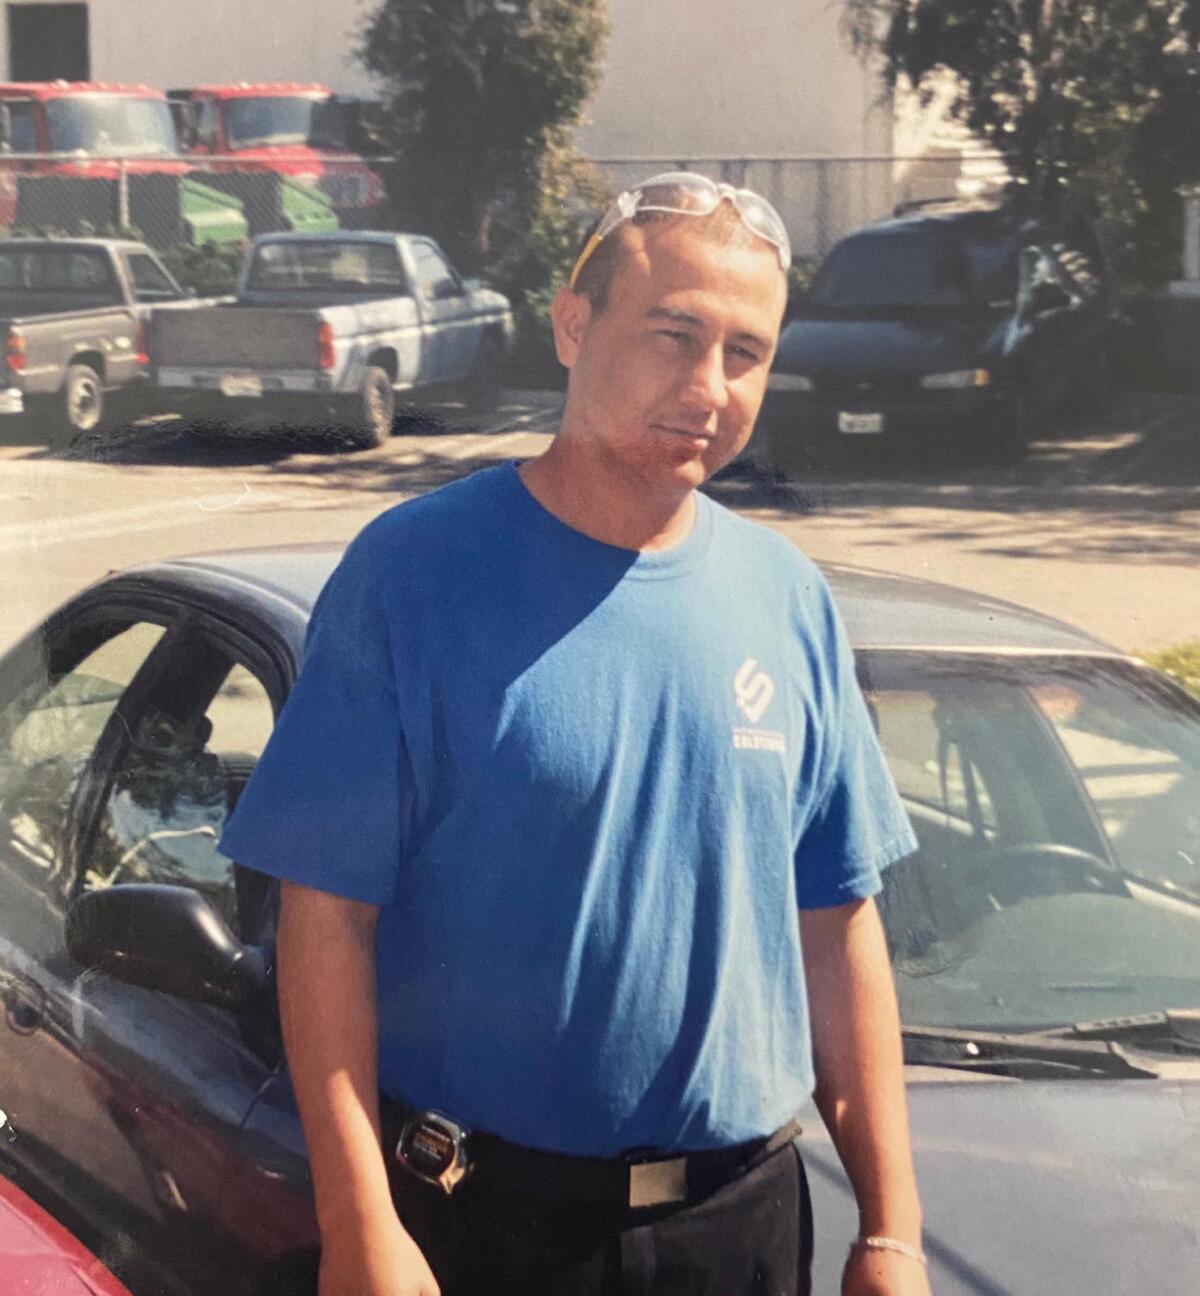 Luis Manuel Garcia was shot and killed on Aug. 9 by Tustin police.